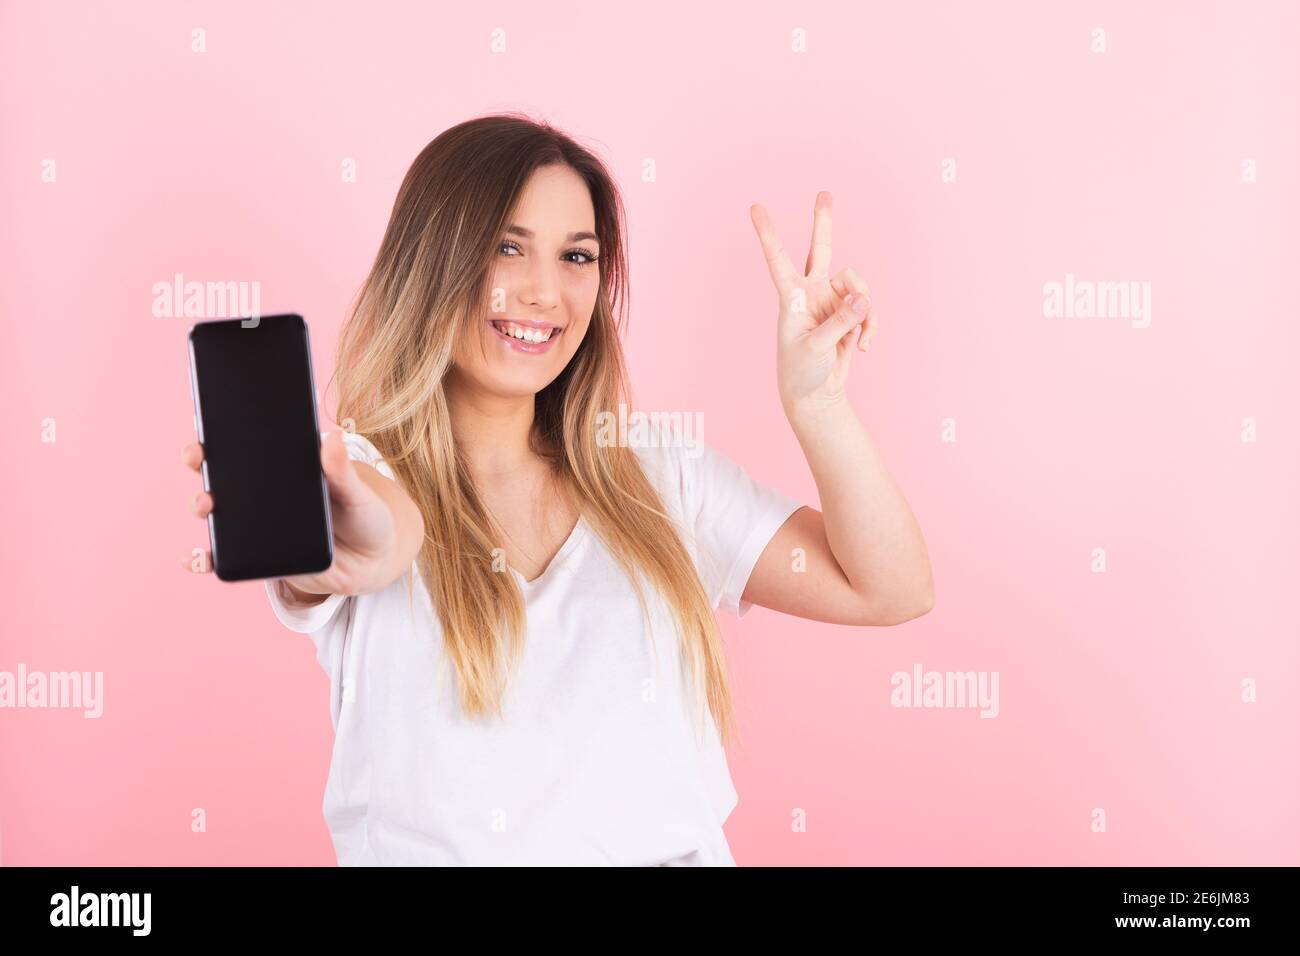 a young blonde woman shows her cell phone with a victory gesture Stock Photo